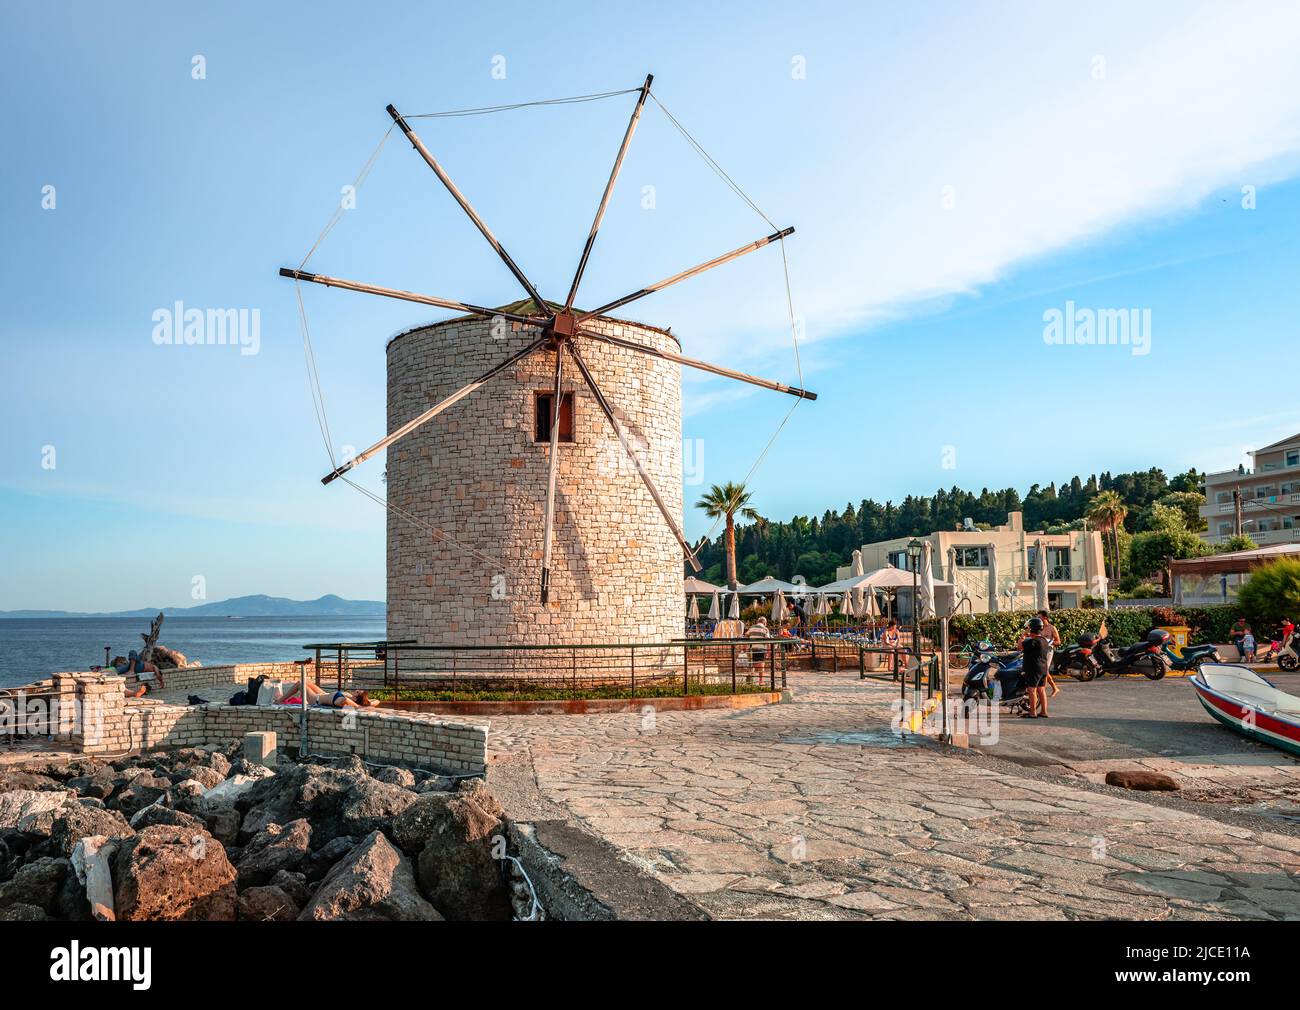 Corfu, Greece - June 3 2022: The seaside reconstructed traditional old windmill and the small promenade with cobbled stones in the afternoon. Stock Photo